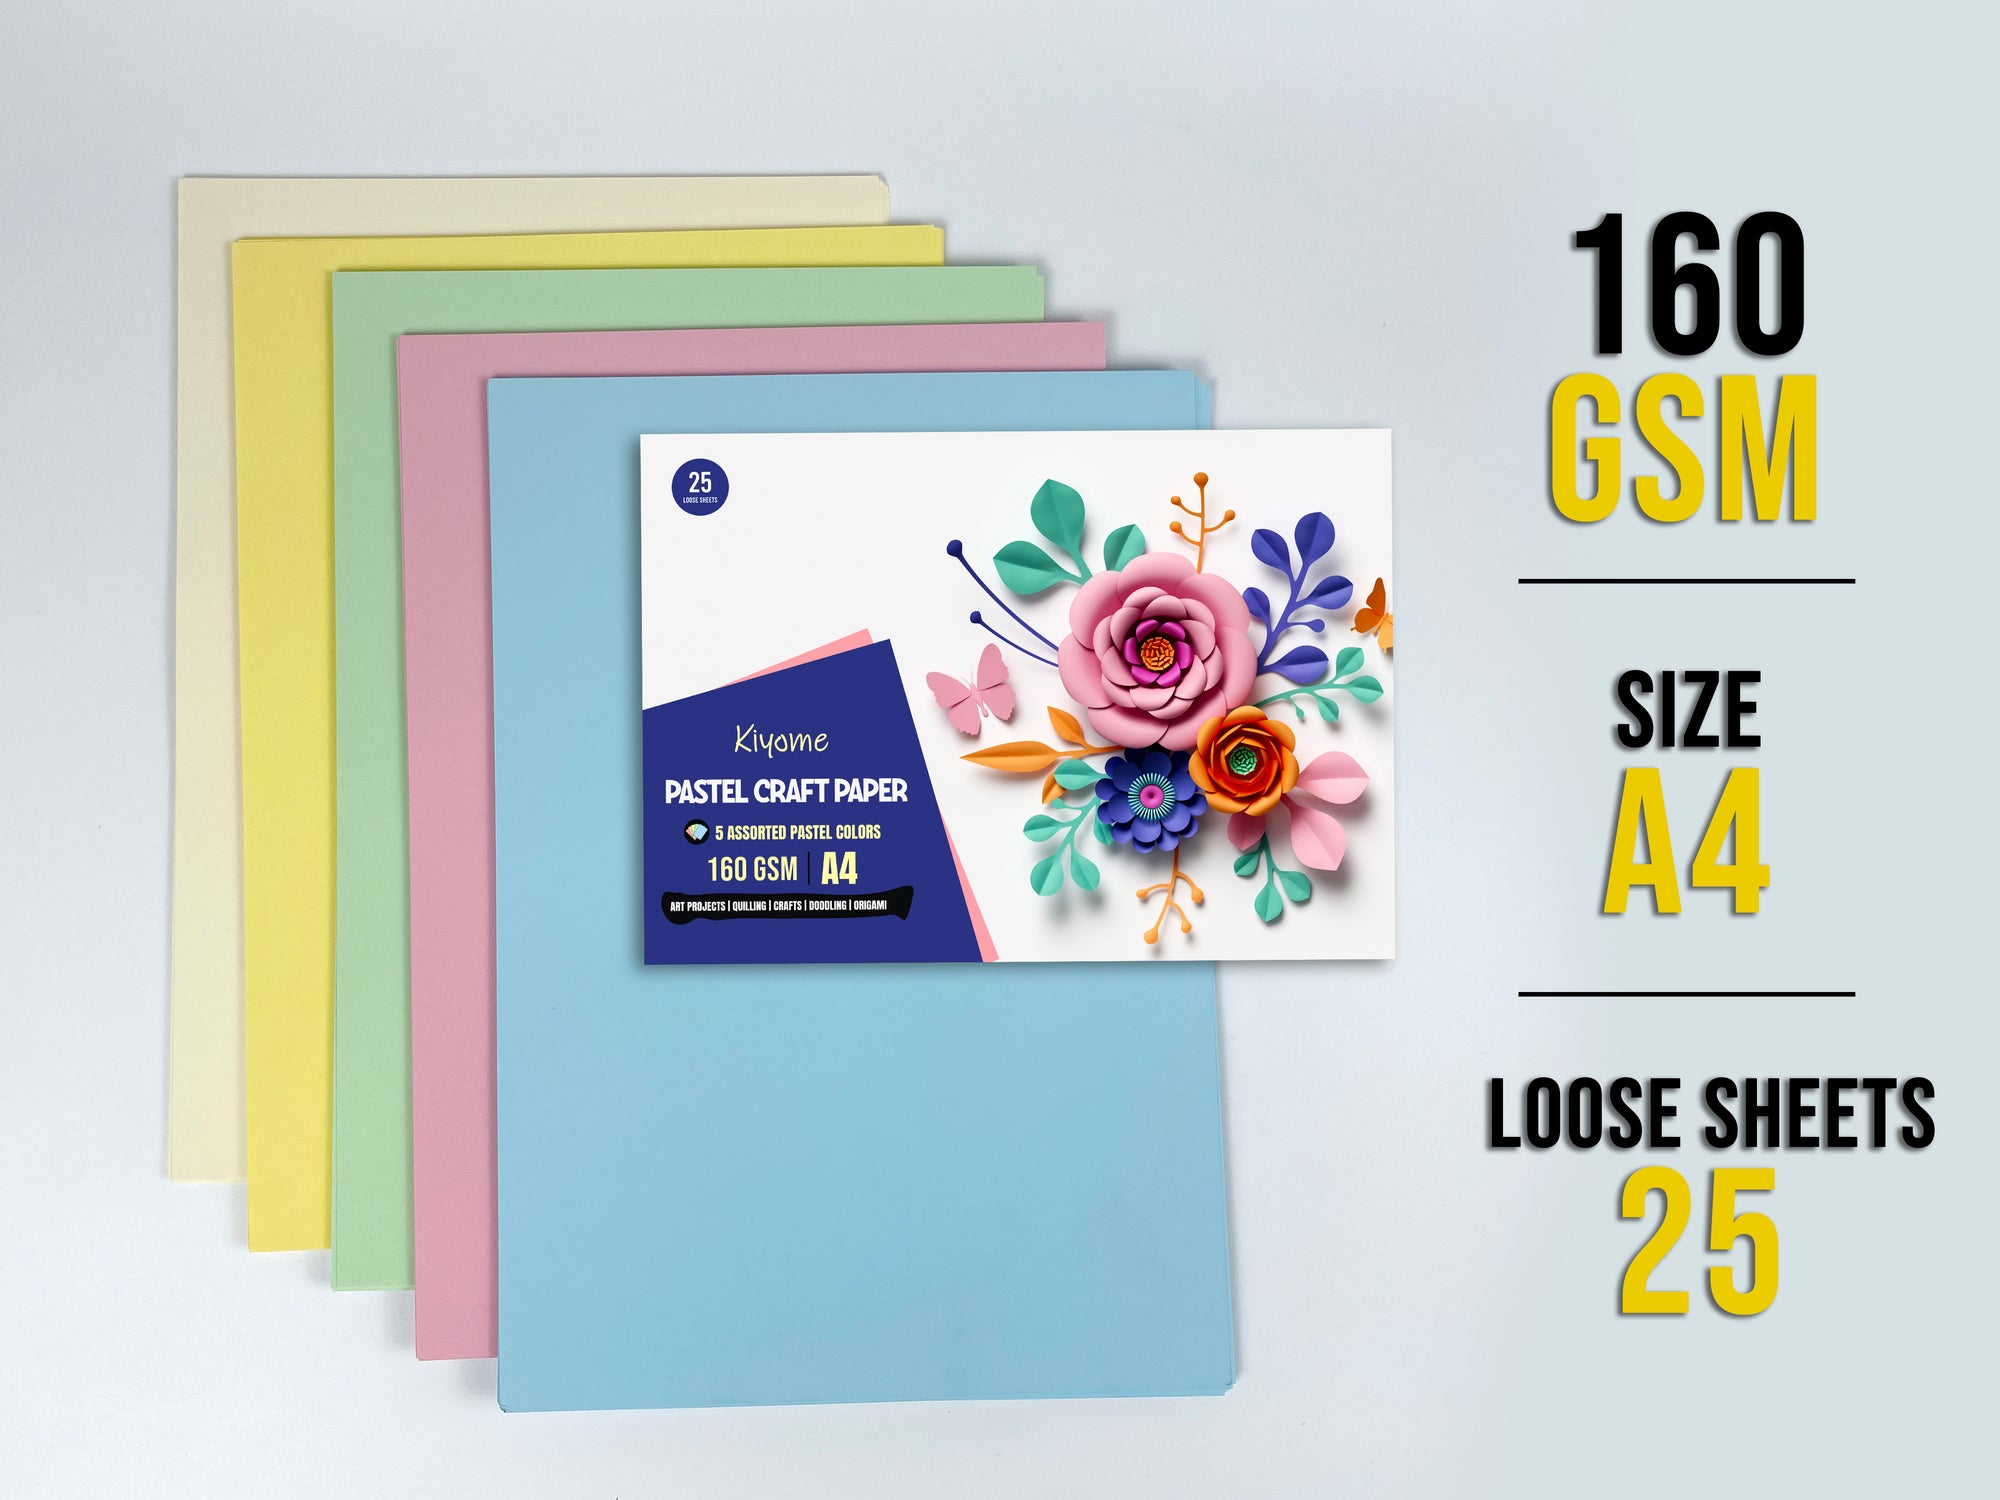 Kiyome Craft Paper | 160 GSM | A4 | Pastel Colours | 25 Sheets